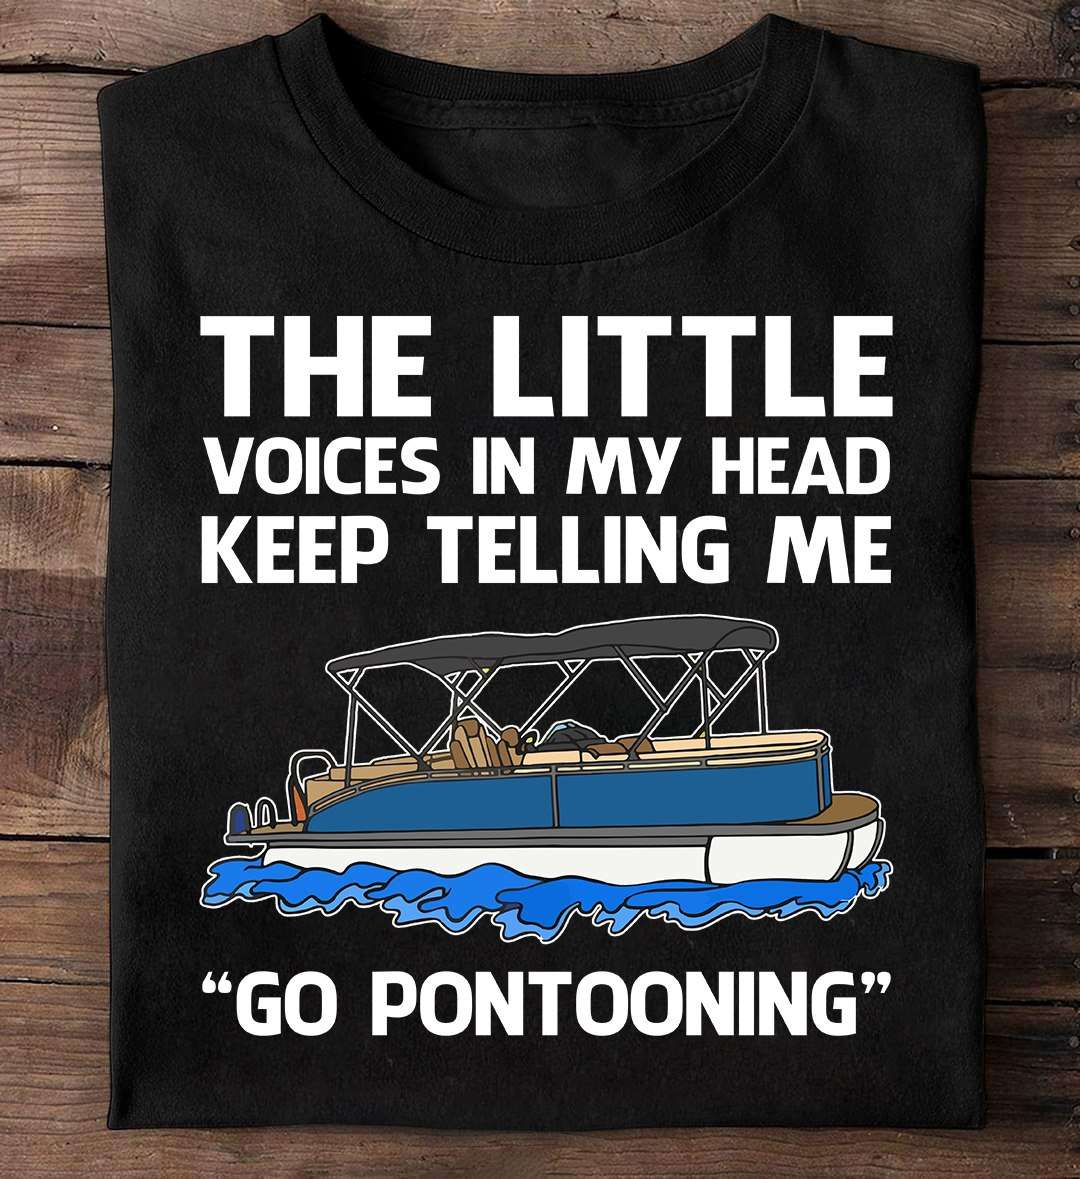 The little voices in my head keep telling me go pontooning - Pontoon graphic T-shirt